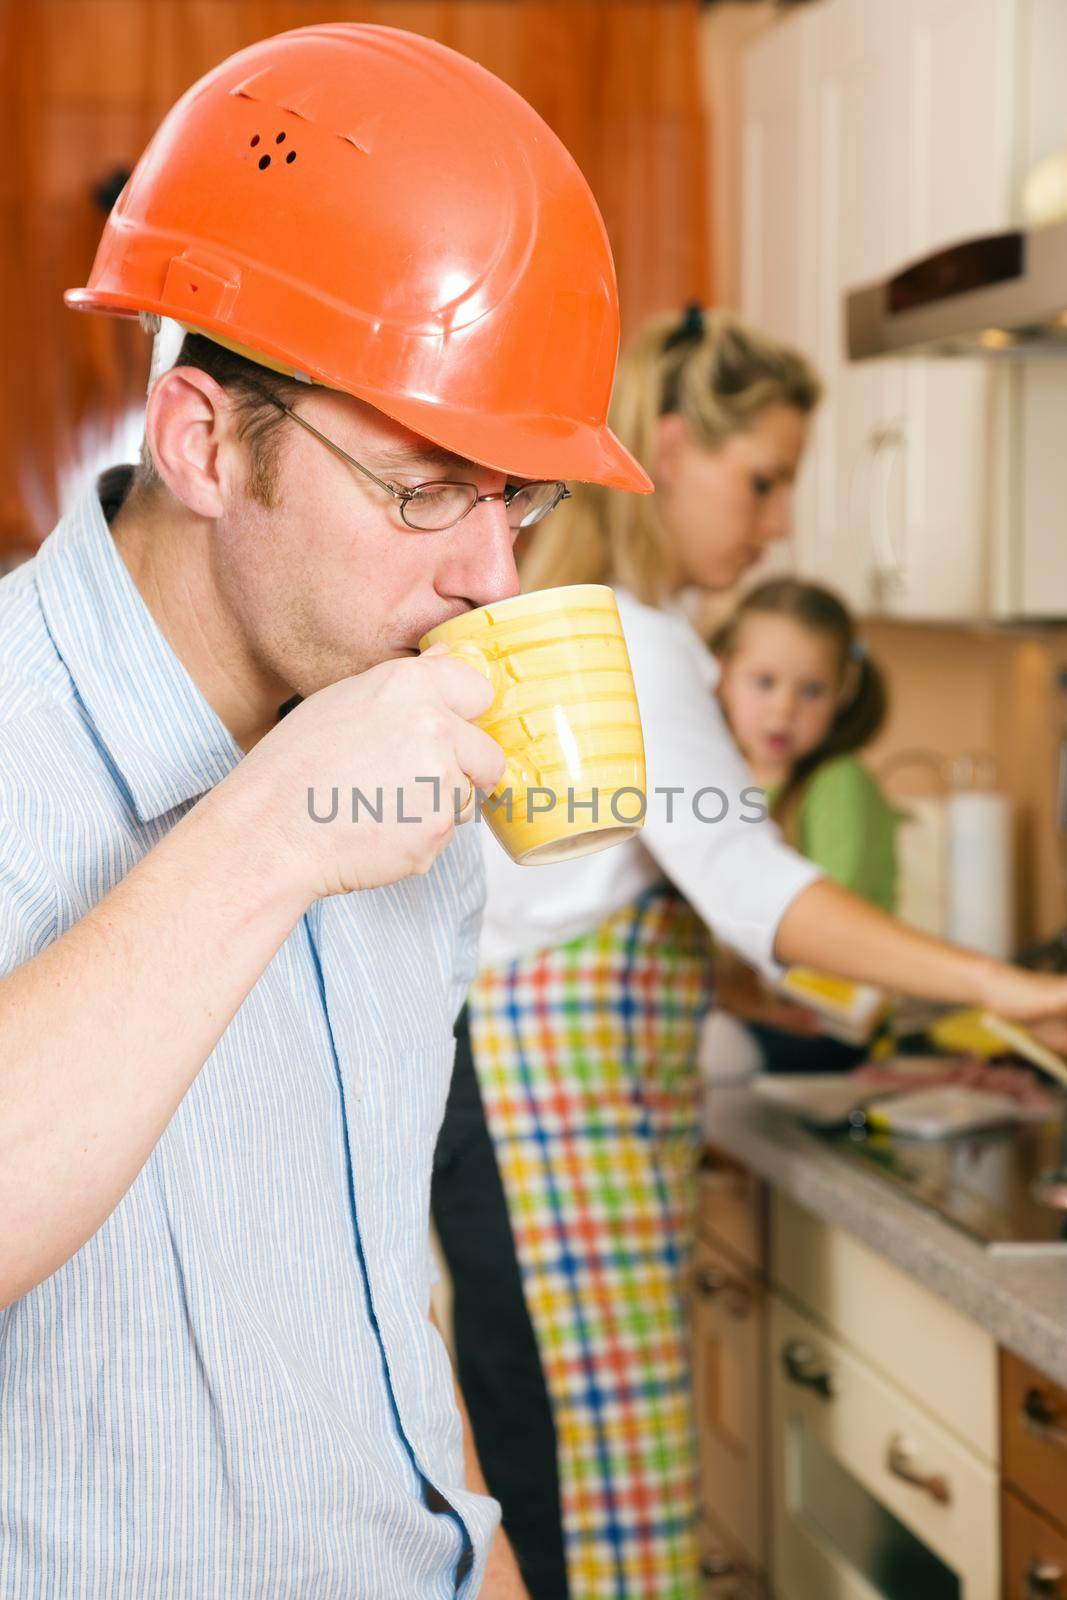 Construction worker with hardhat and father of a family having a morning cup of coffee before heading for his workplace